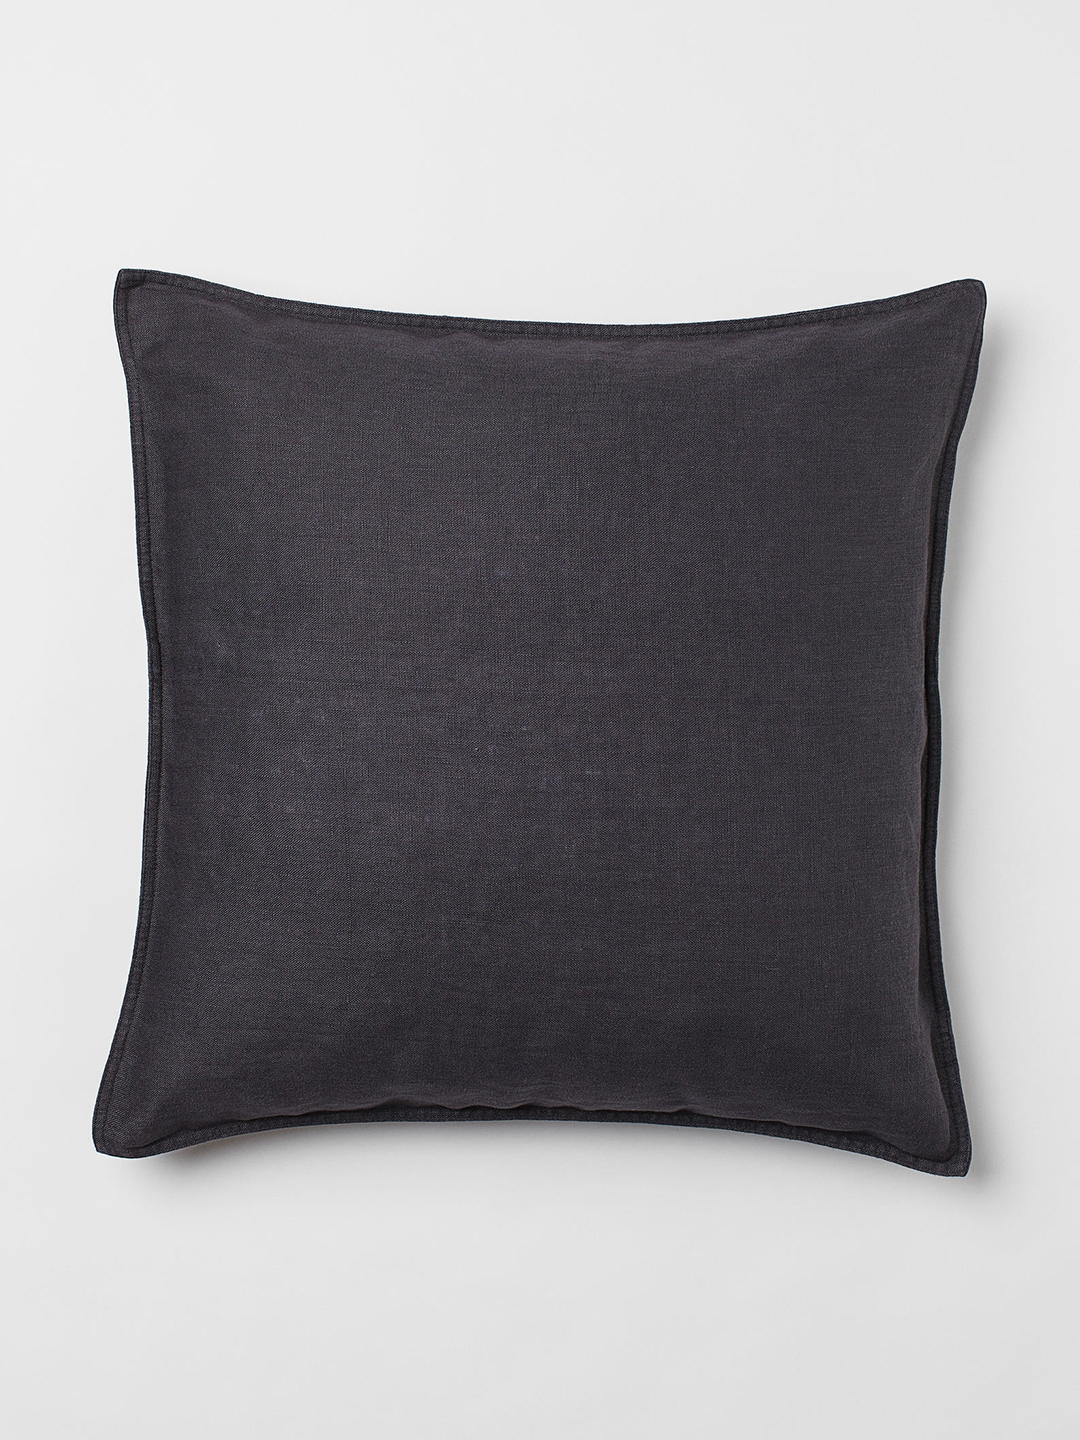 H&M Charcoal Grey Solid Square Linen Cushion Cover